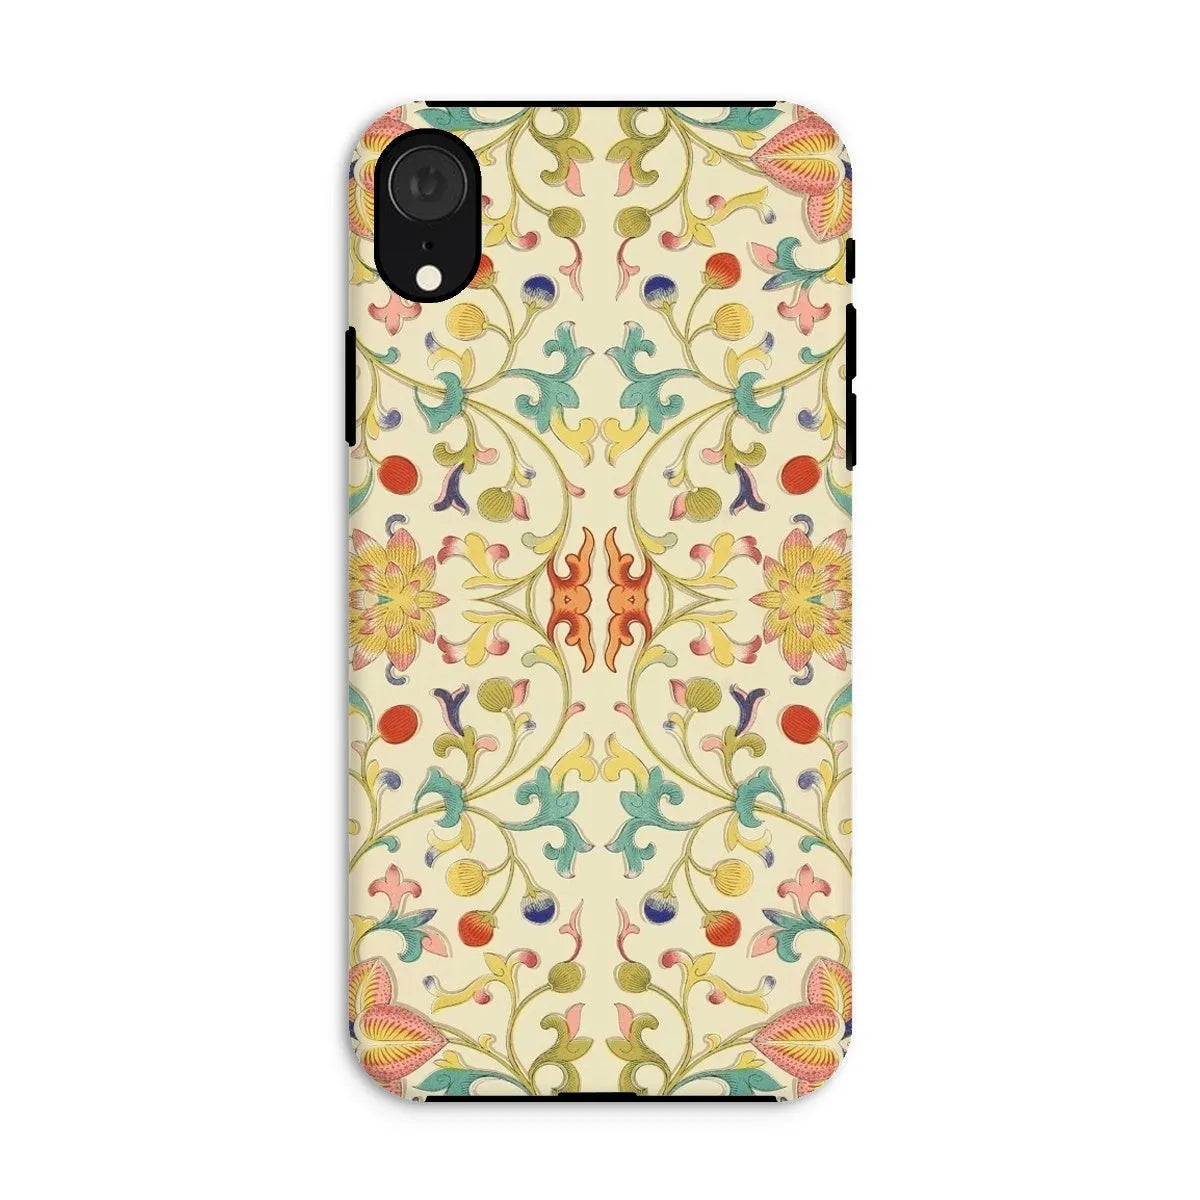 Over The Rainbow - Chinoiserie Pattern Art Phone Case - Iphone Xr / Matte - Mobile Phone Cases - Aesthetic Art